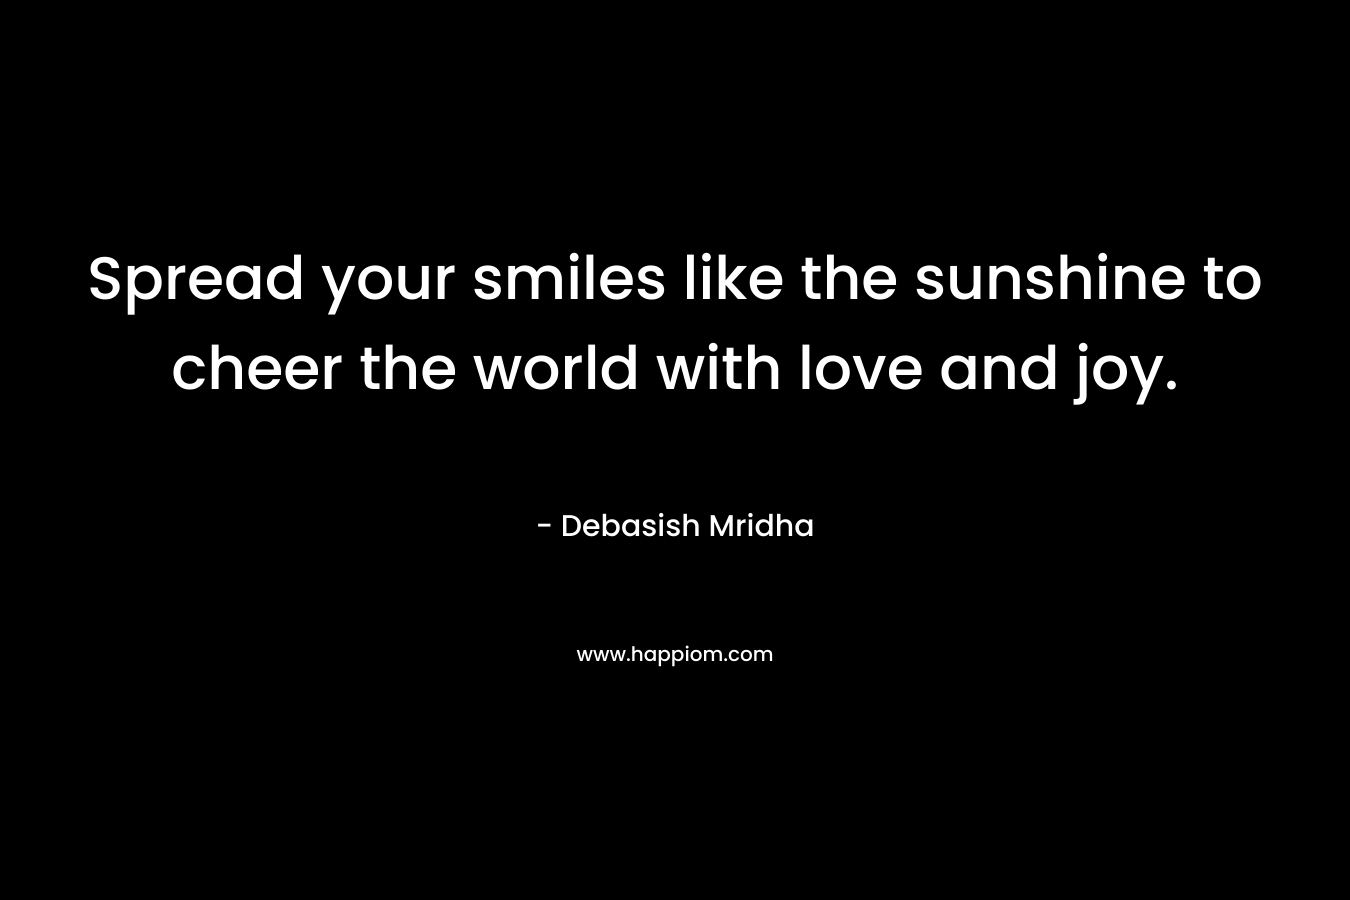 Spread your smiles like the sunshine to cheer the world with love and joy.